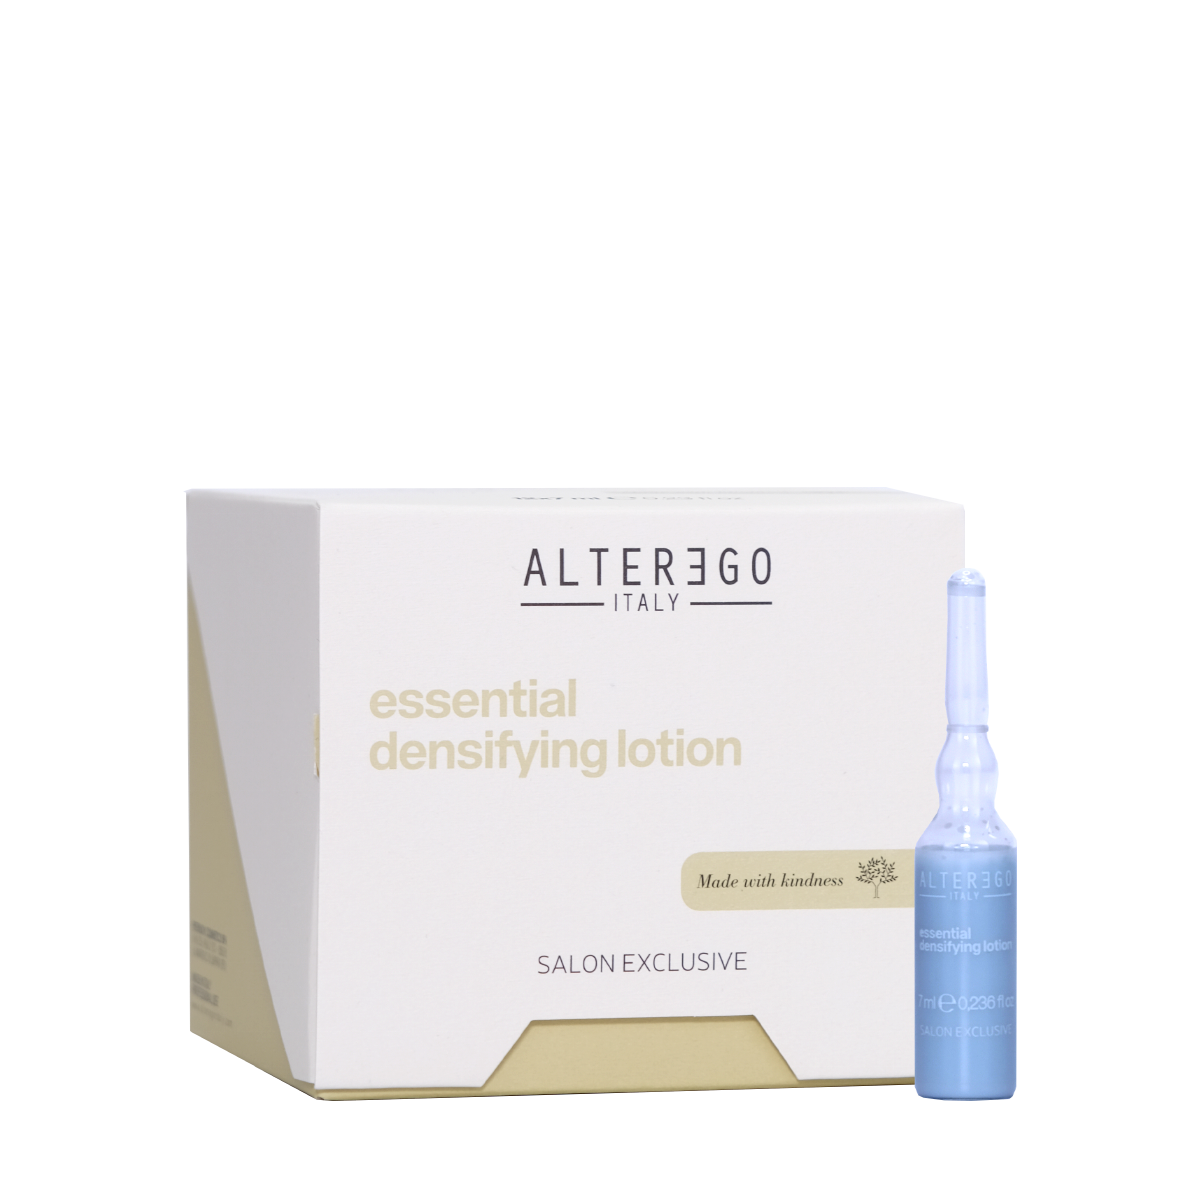 Boutique Ajania - Alter Ego Essential densifying lotion - 12 x 7 ml